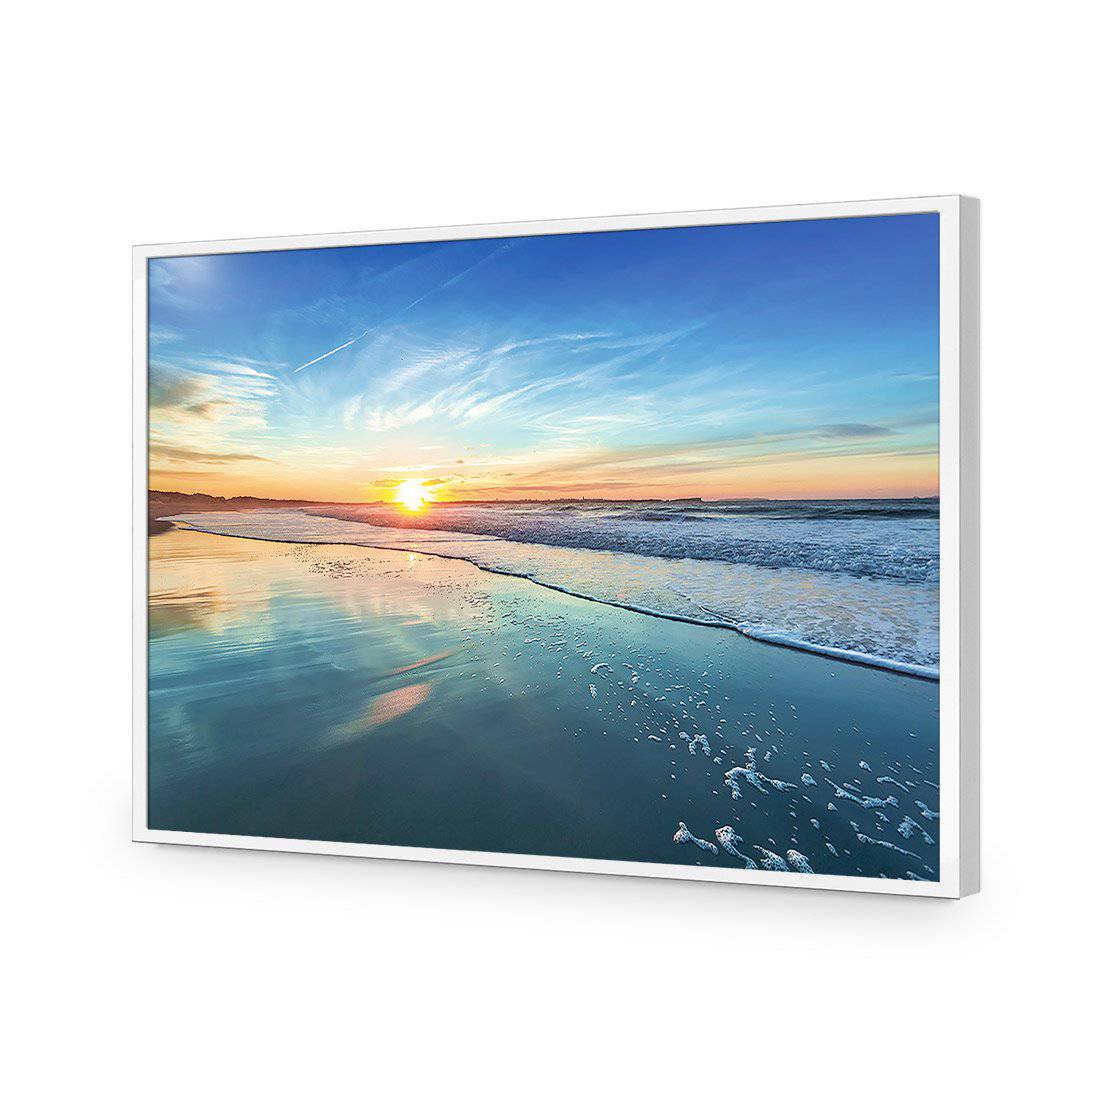 Sky Stream-Acrylic-Wall Art Design-Without Border-Acrylic - White Frame-45x30cm-Wall Art Designs